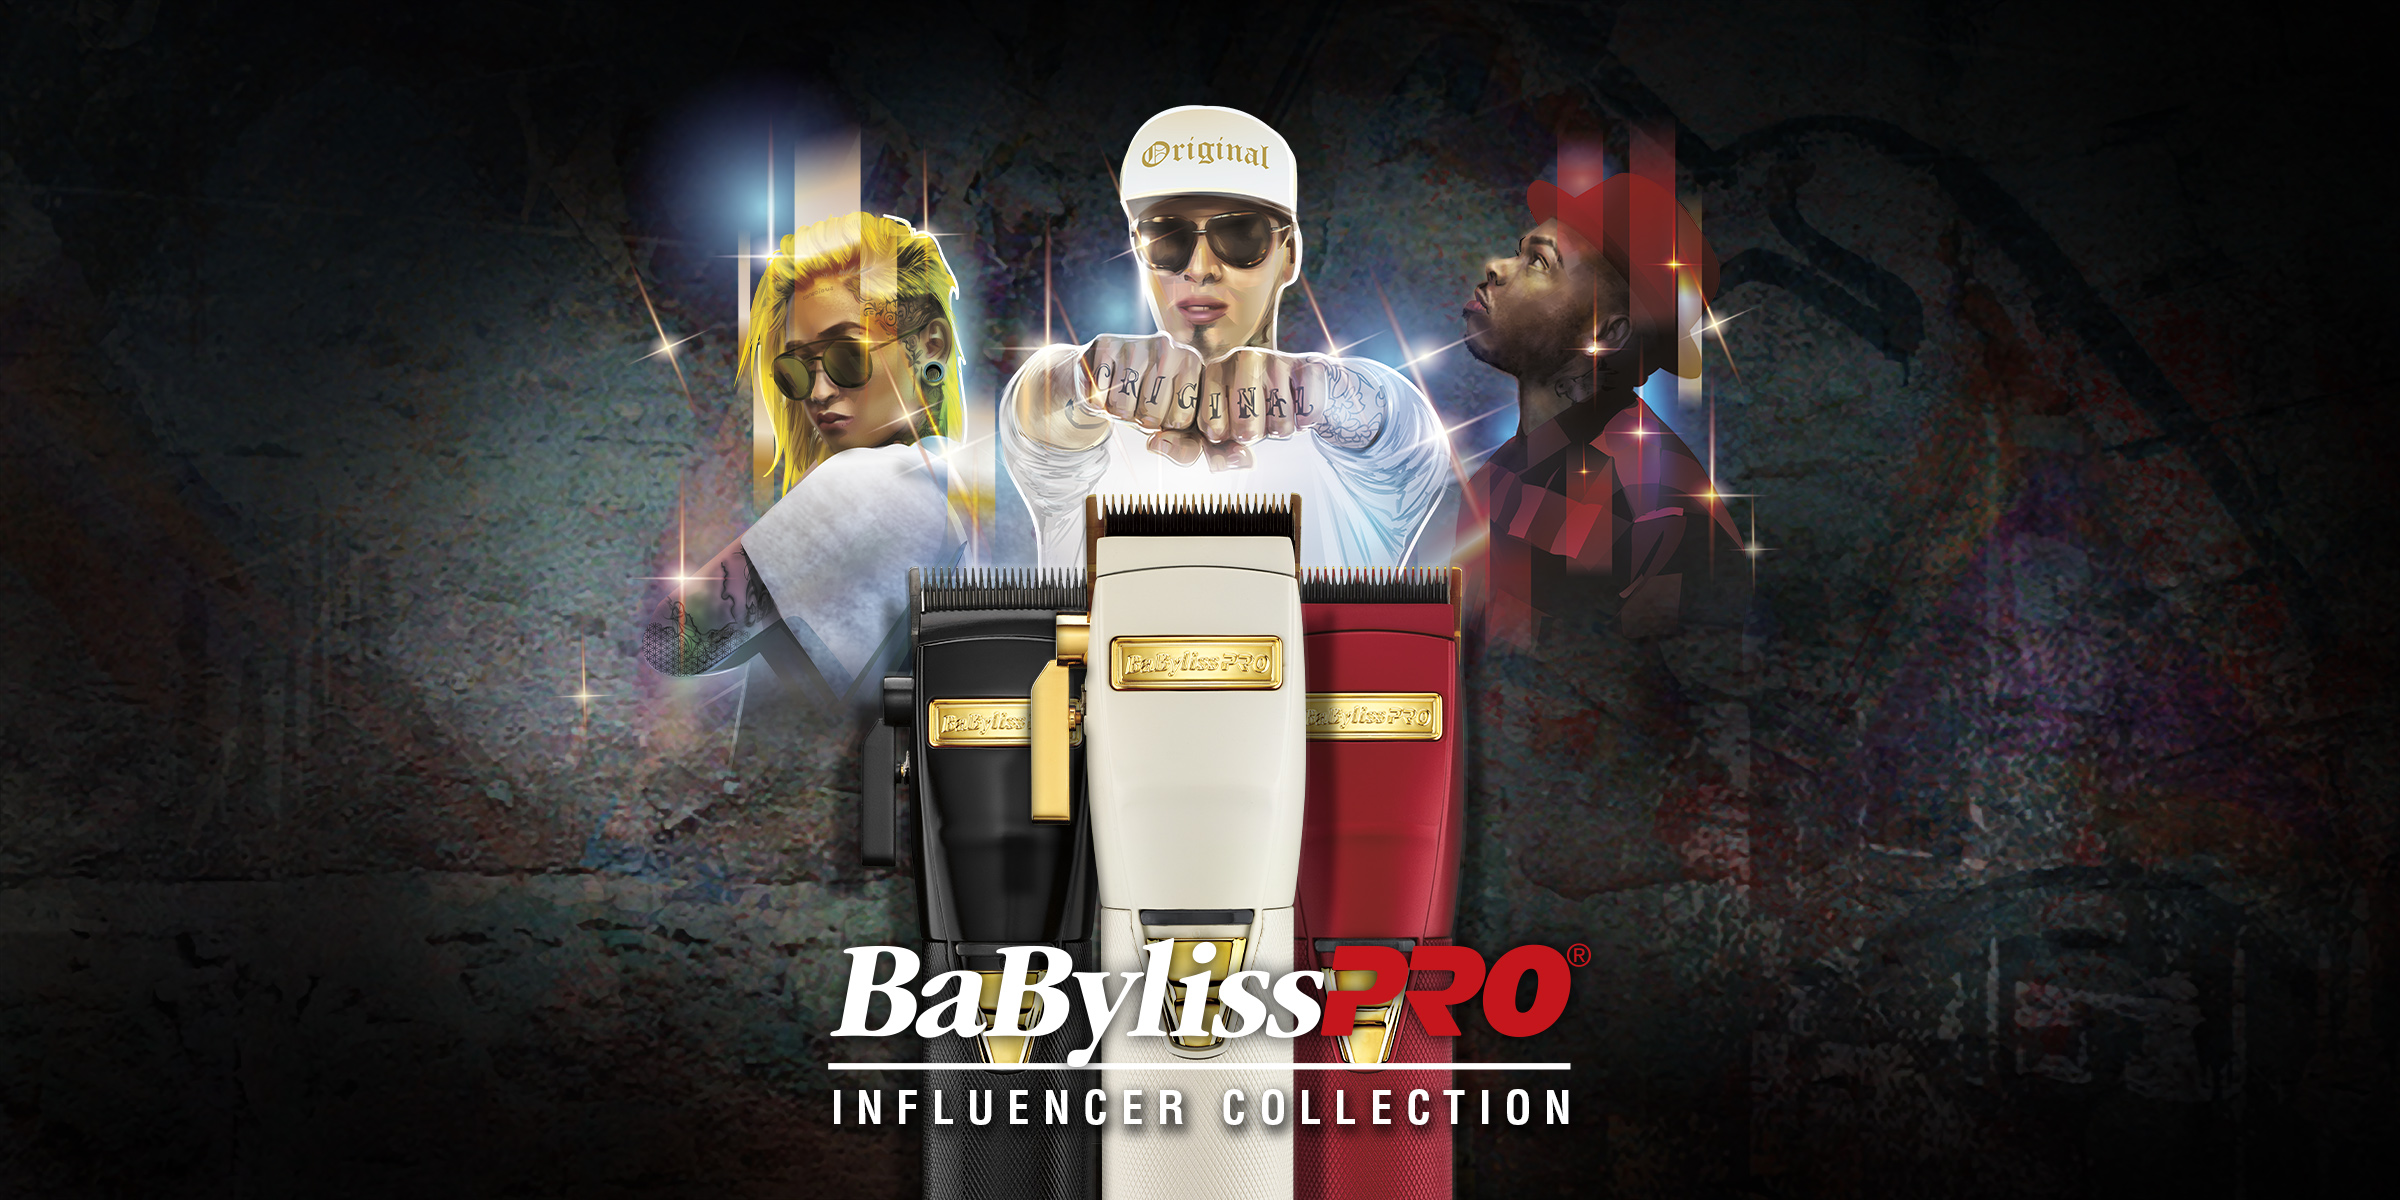 BaBylissPRO Launch Influencer Collection